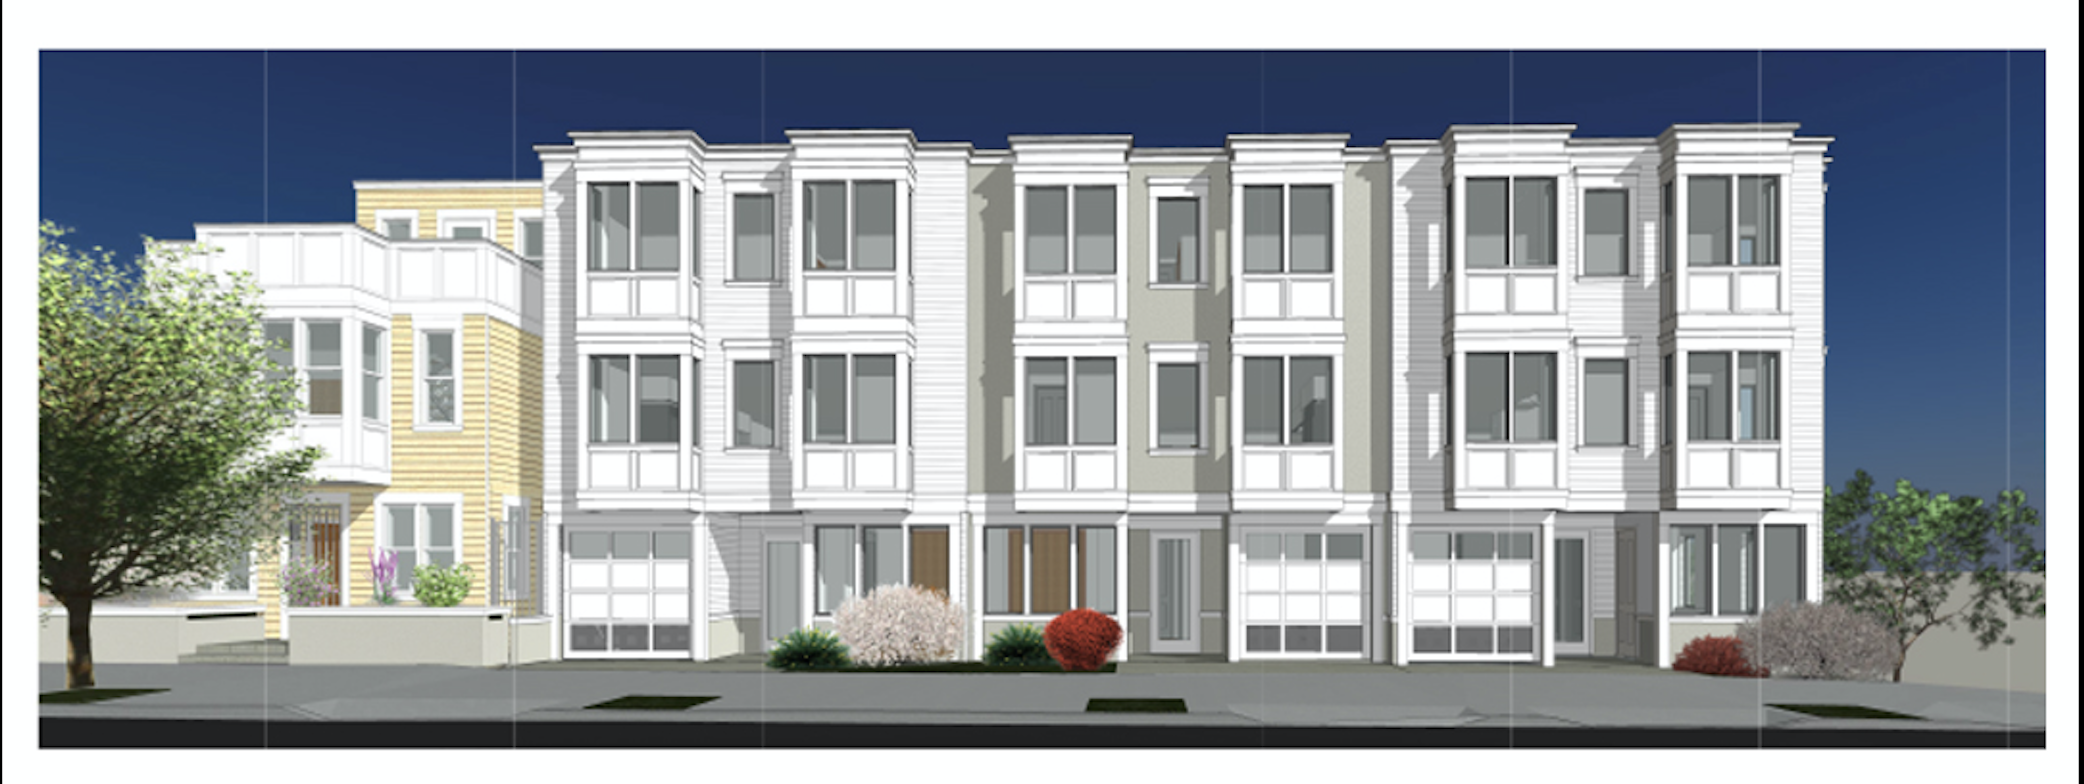 Proposed Elevation of 938, 950, 960 Jamestown Avenue 